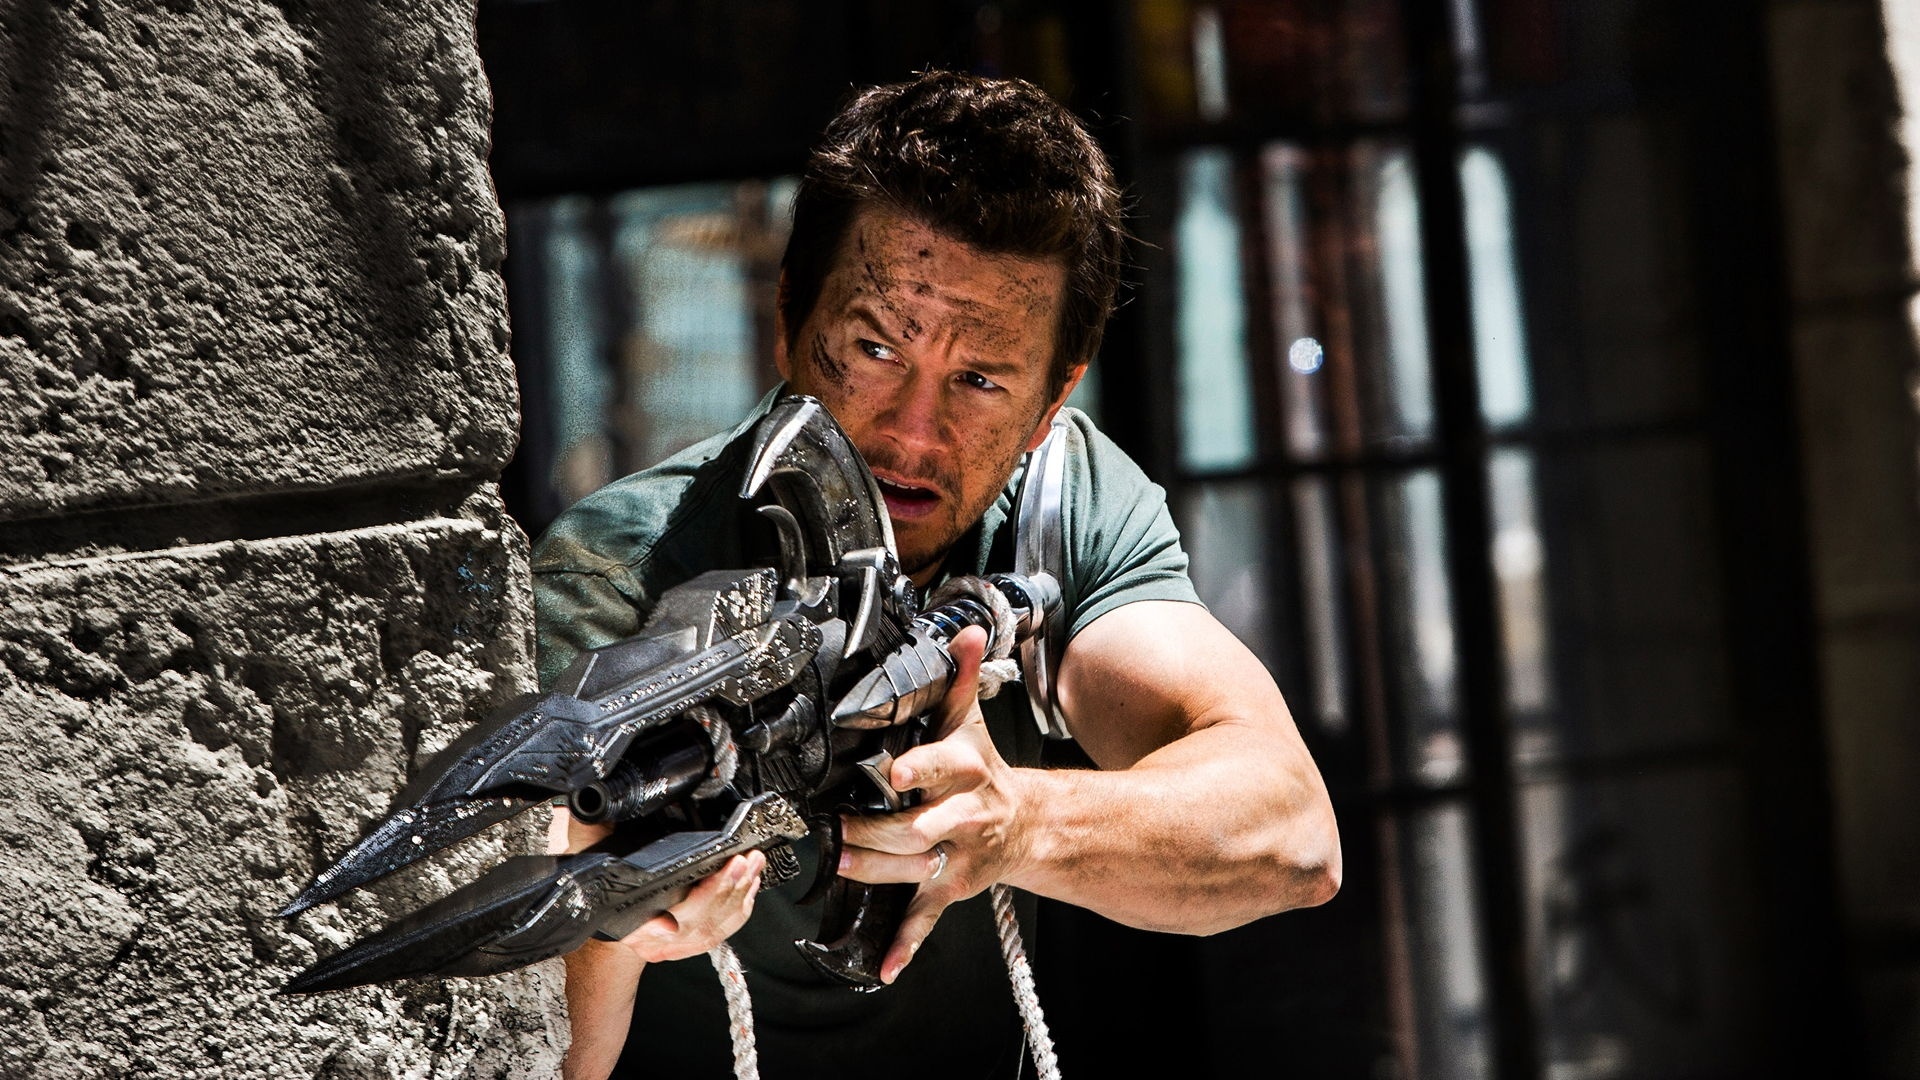 Mark Wahlberg, HD wallpapers, Background images, 1920x1080 Full HD Desktop